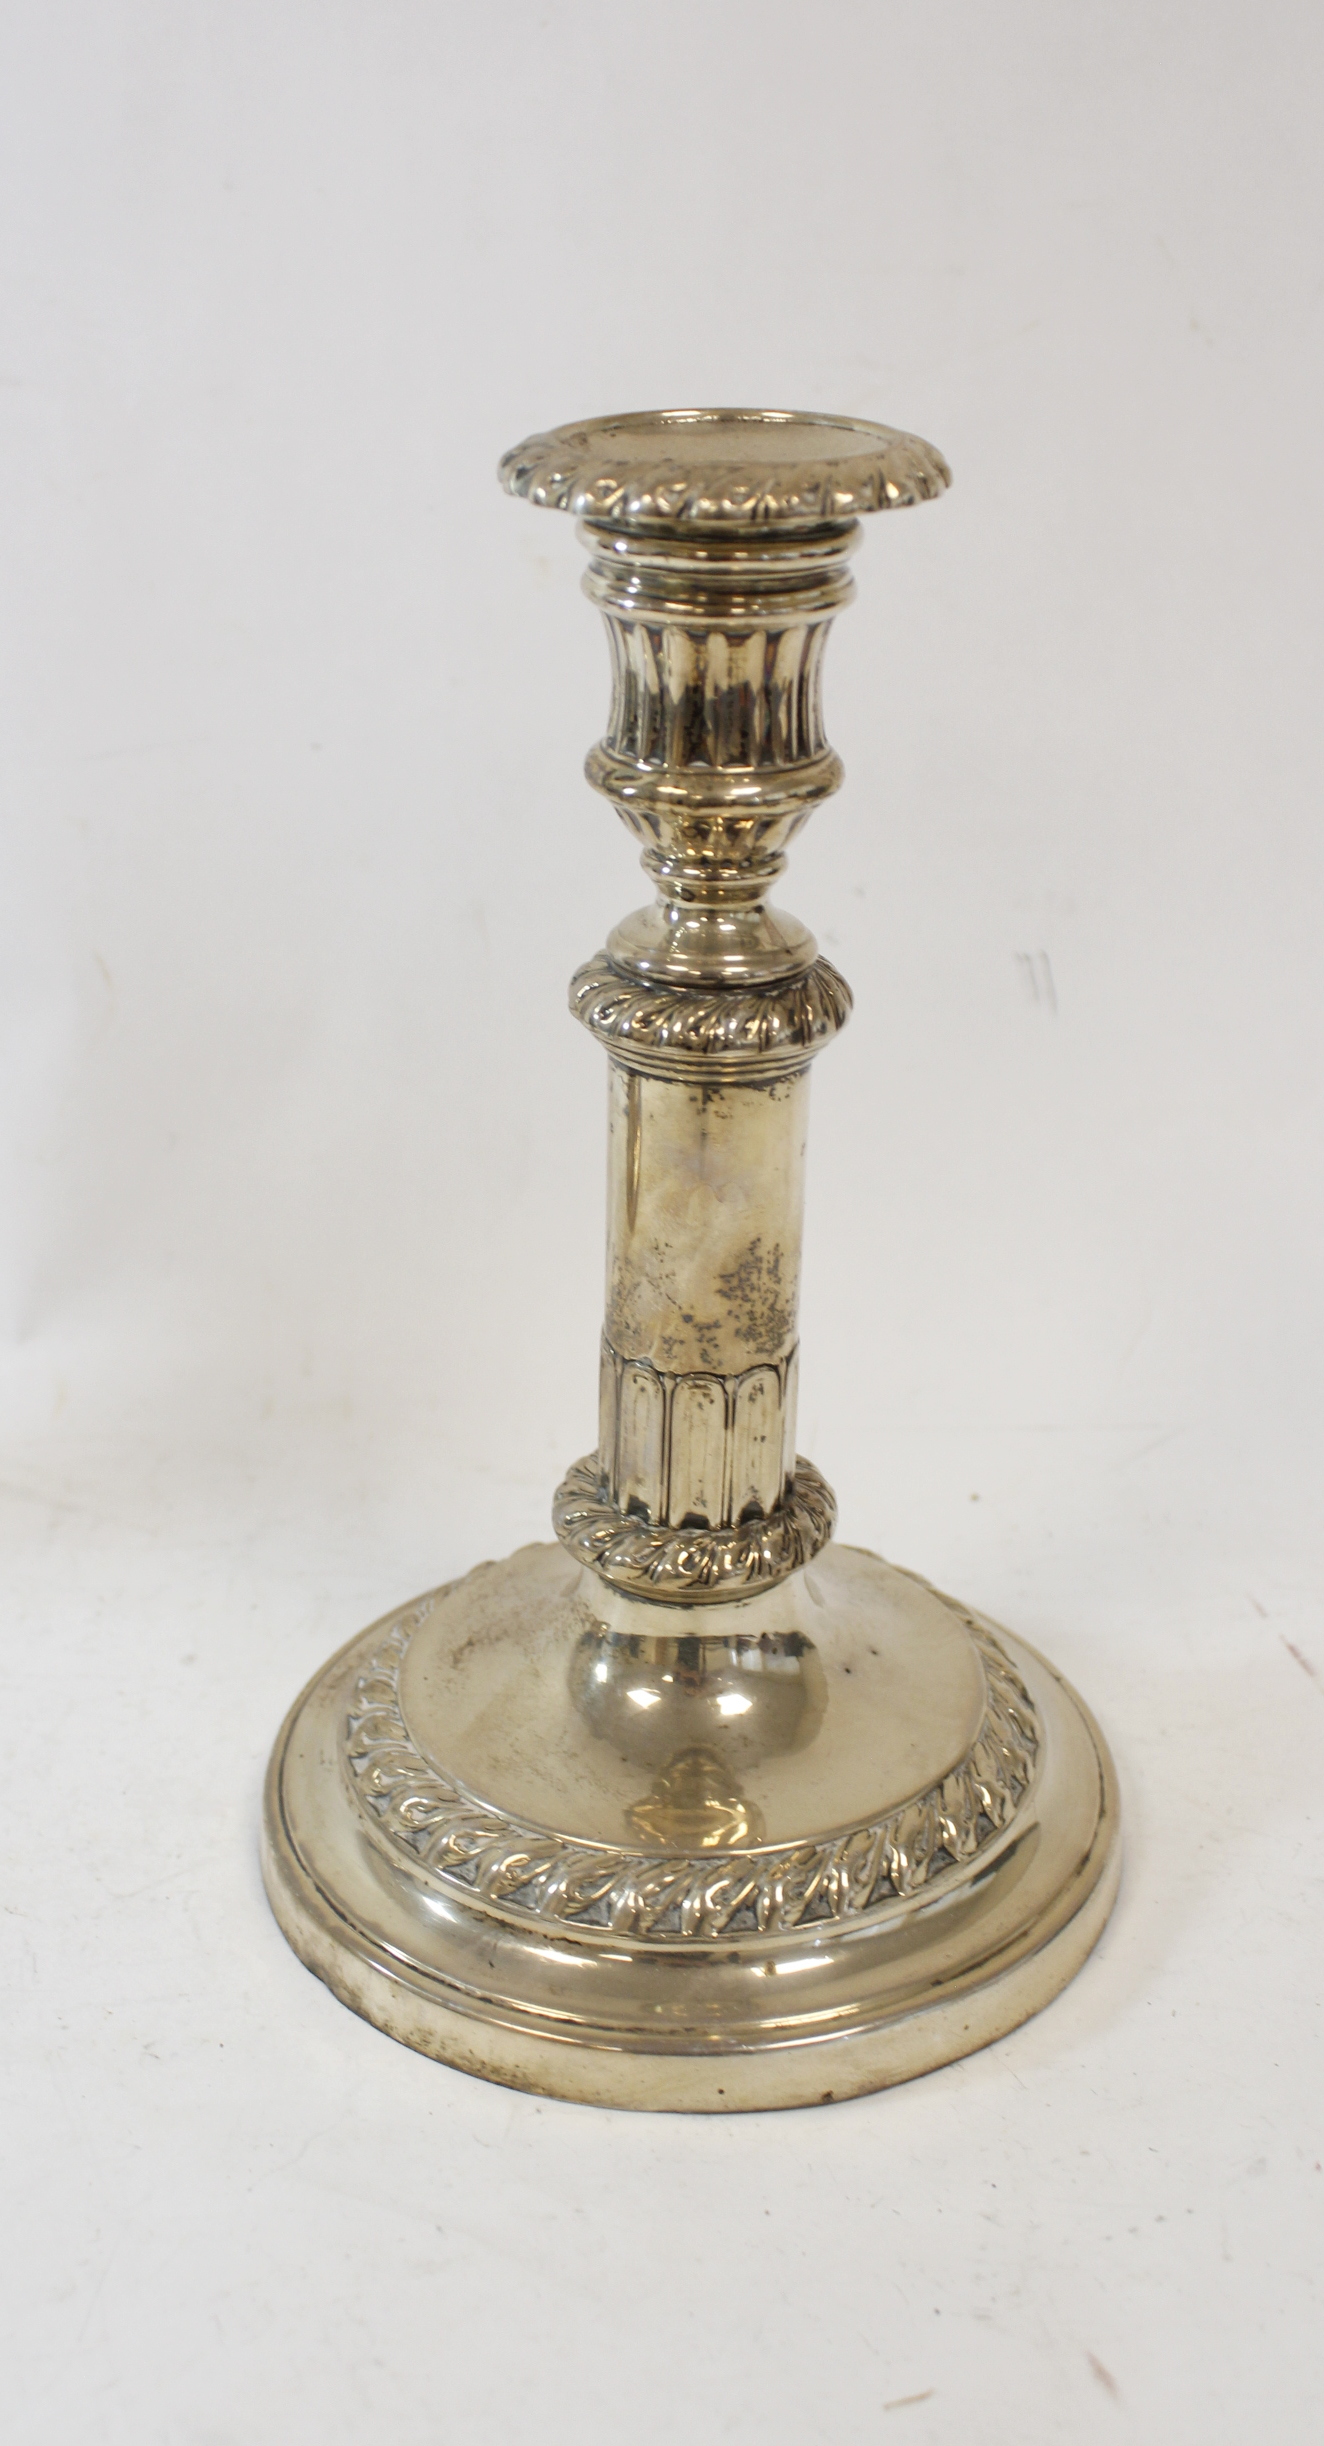 Pair of silver sliding candlesticks with foliate bands by T & J Settle, Sheffield 1819 (one a/f). - Image 3 of 5